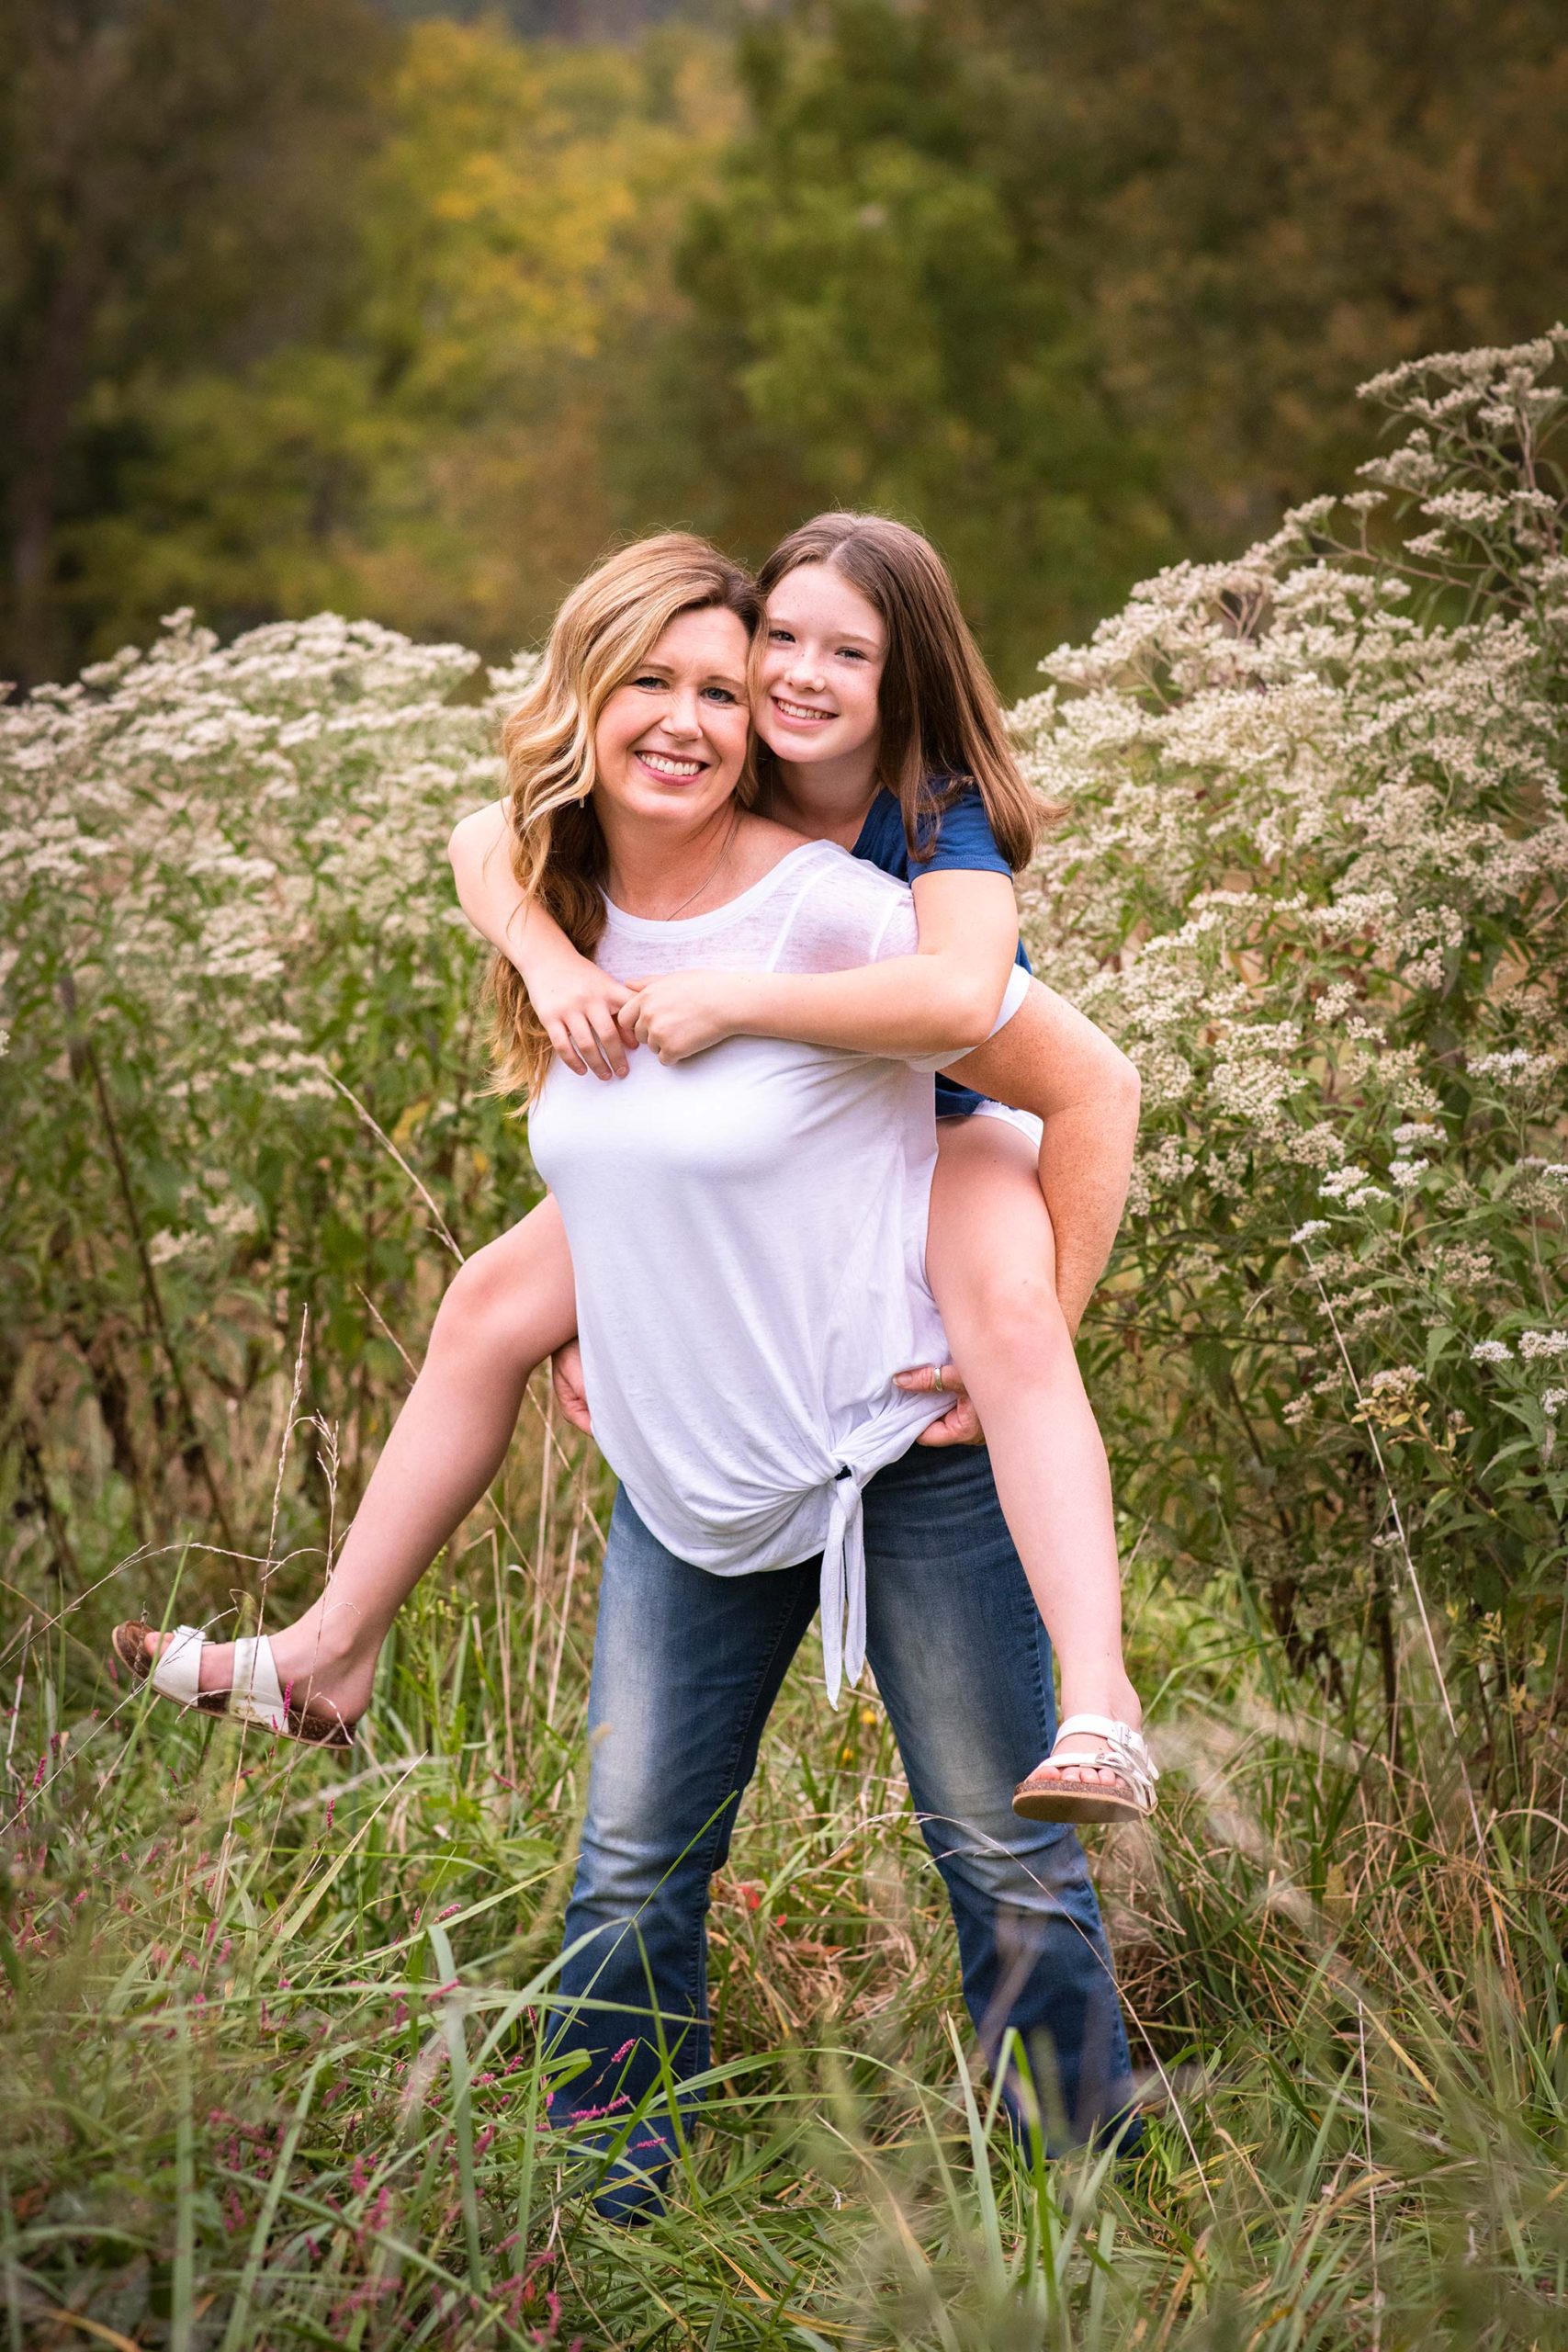 Tween daughter rides on mom's back in filed of flowers.